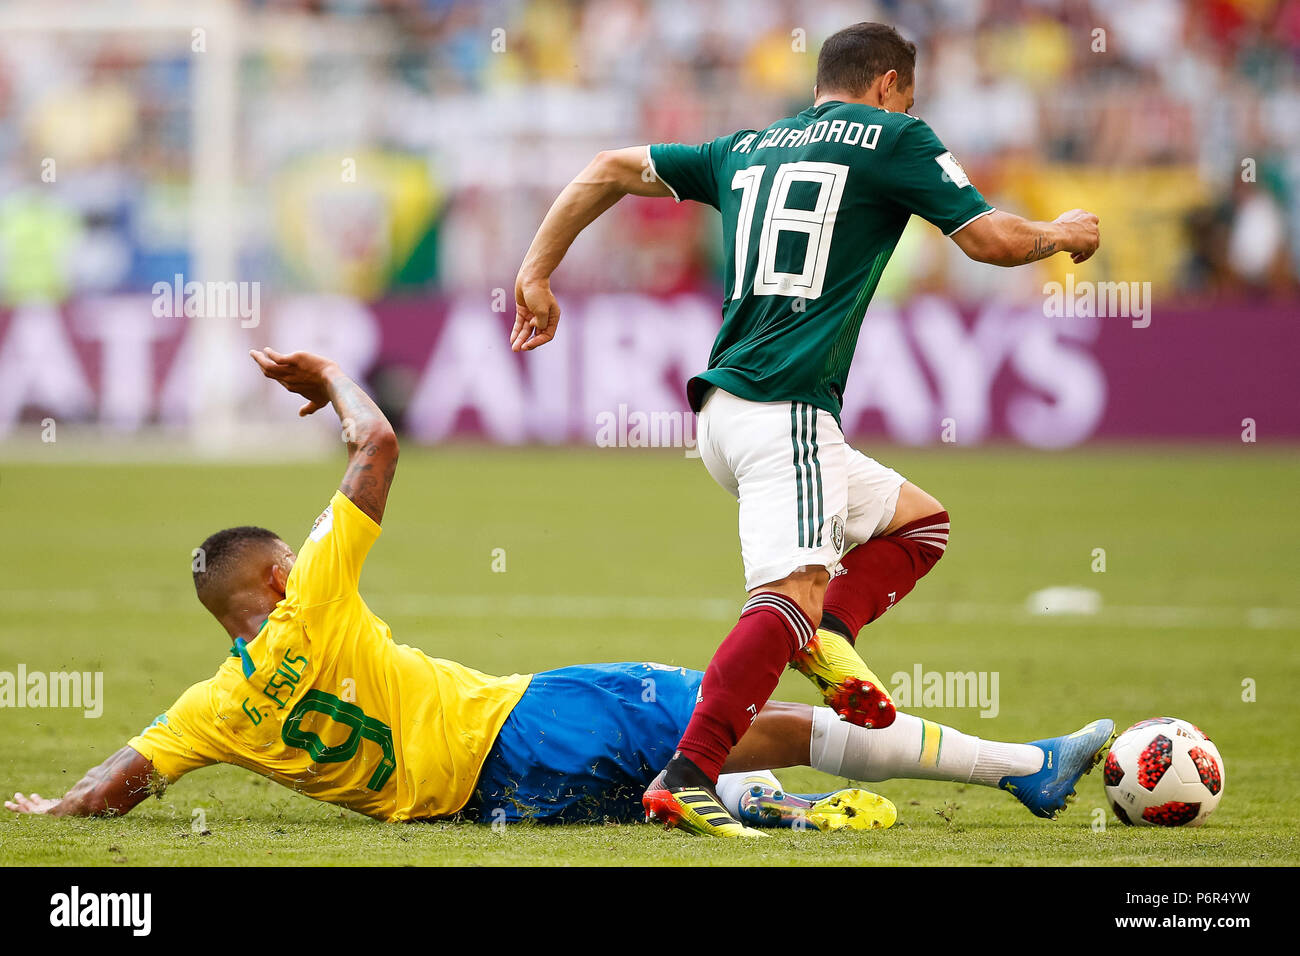 SAMARA, SA - 02.07.2018: BRAZIL VS. MEXICO - Gabriel Jesus do Brasil plays the ball with Andres Guardado of Mexico during the match between Brazil and Mexico, valid for the round of 16 of the 2018 World Cup held at the Samara Arena in Samara, Russia. (Photo: Marcelo Machado de Melo/Fotoarena) Stock Photo